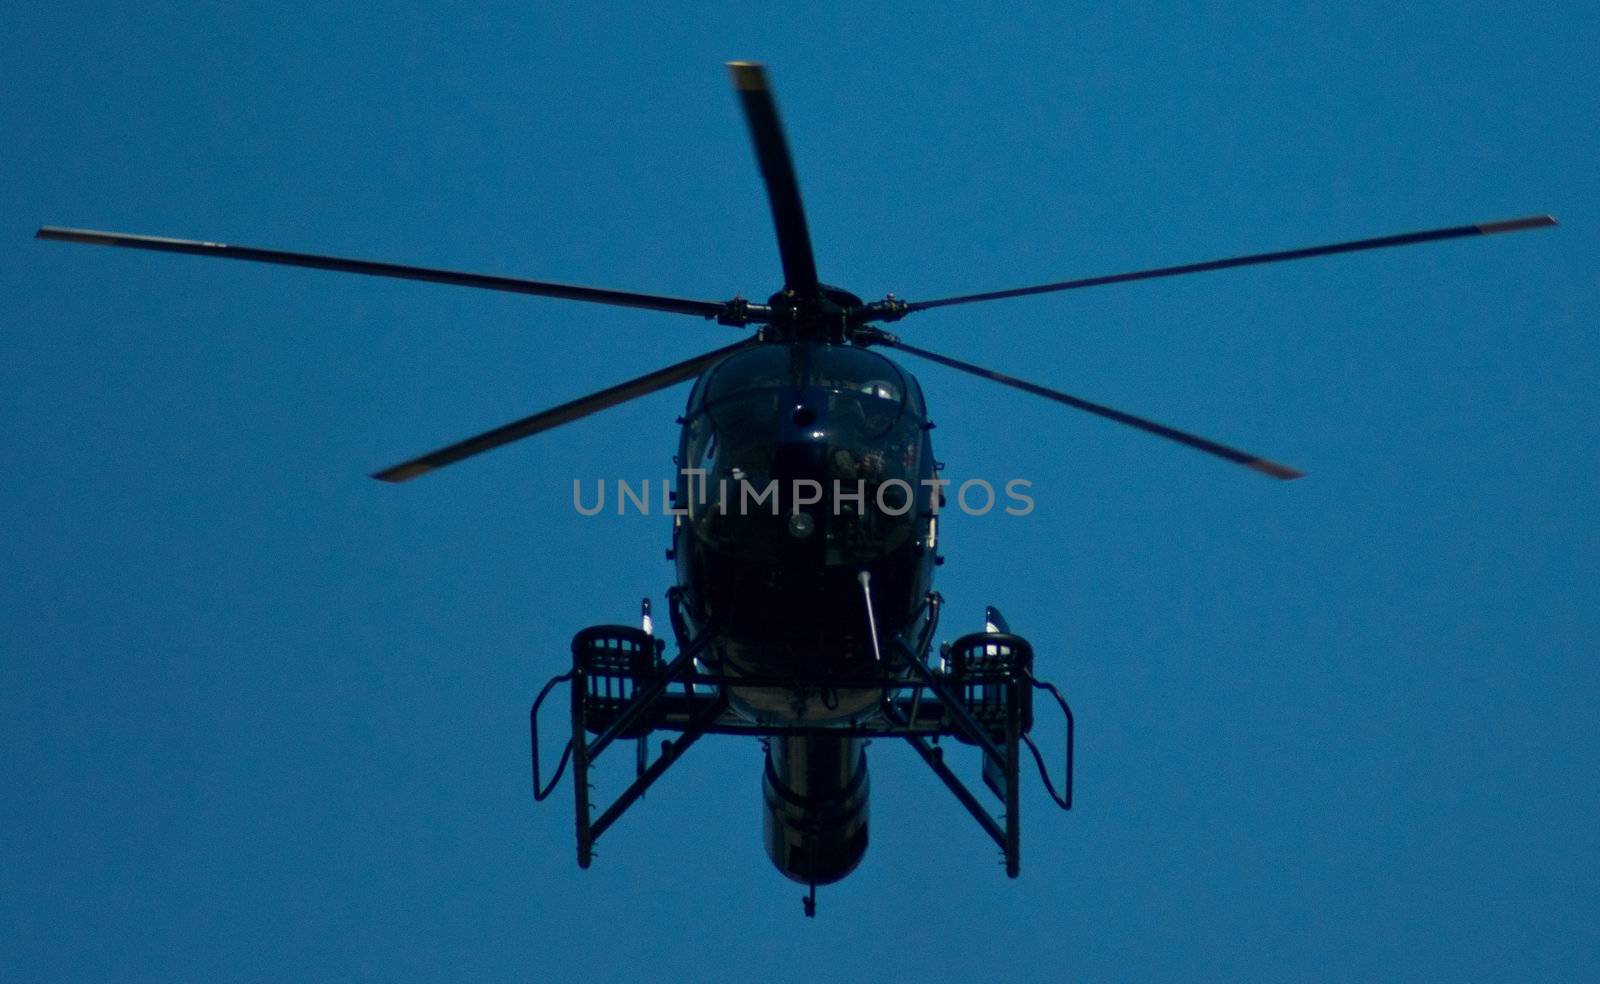 Huntington Beach Police Helicopter "HB1"